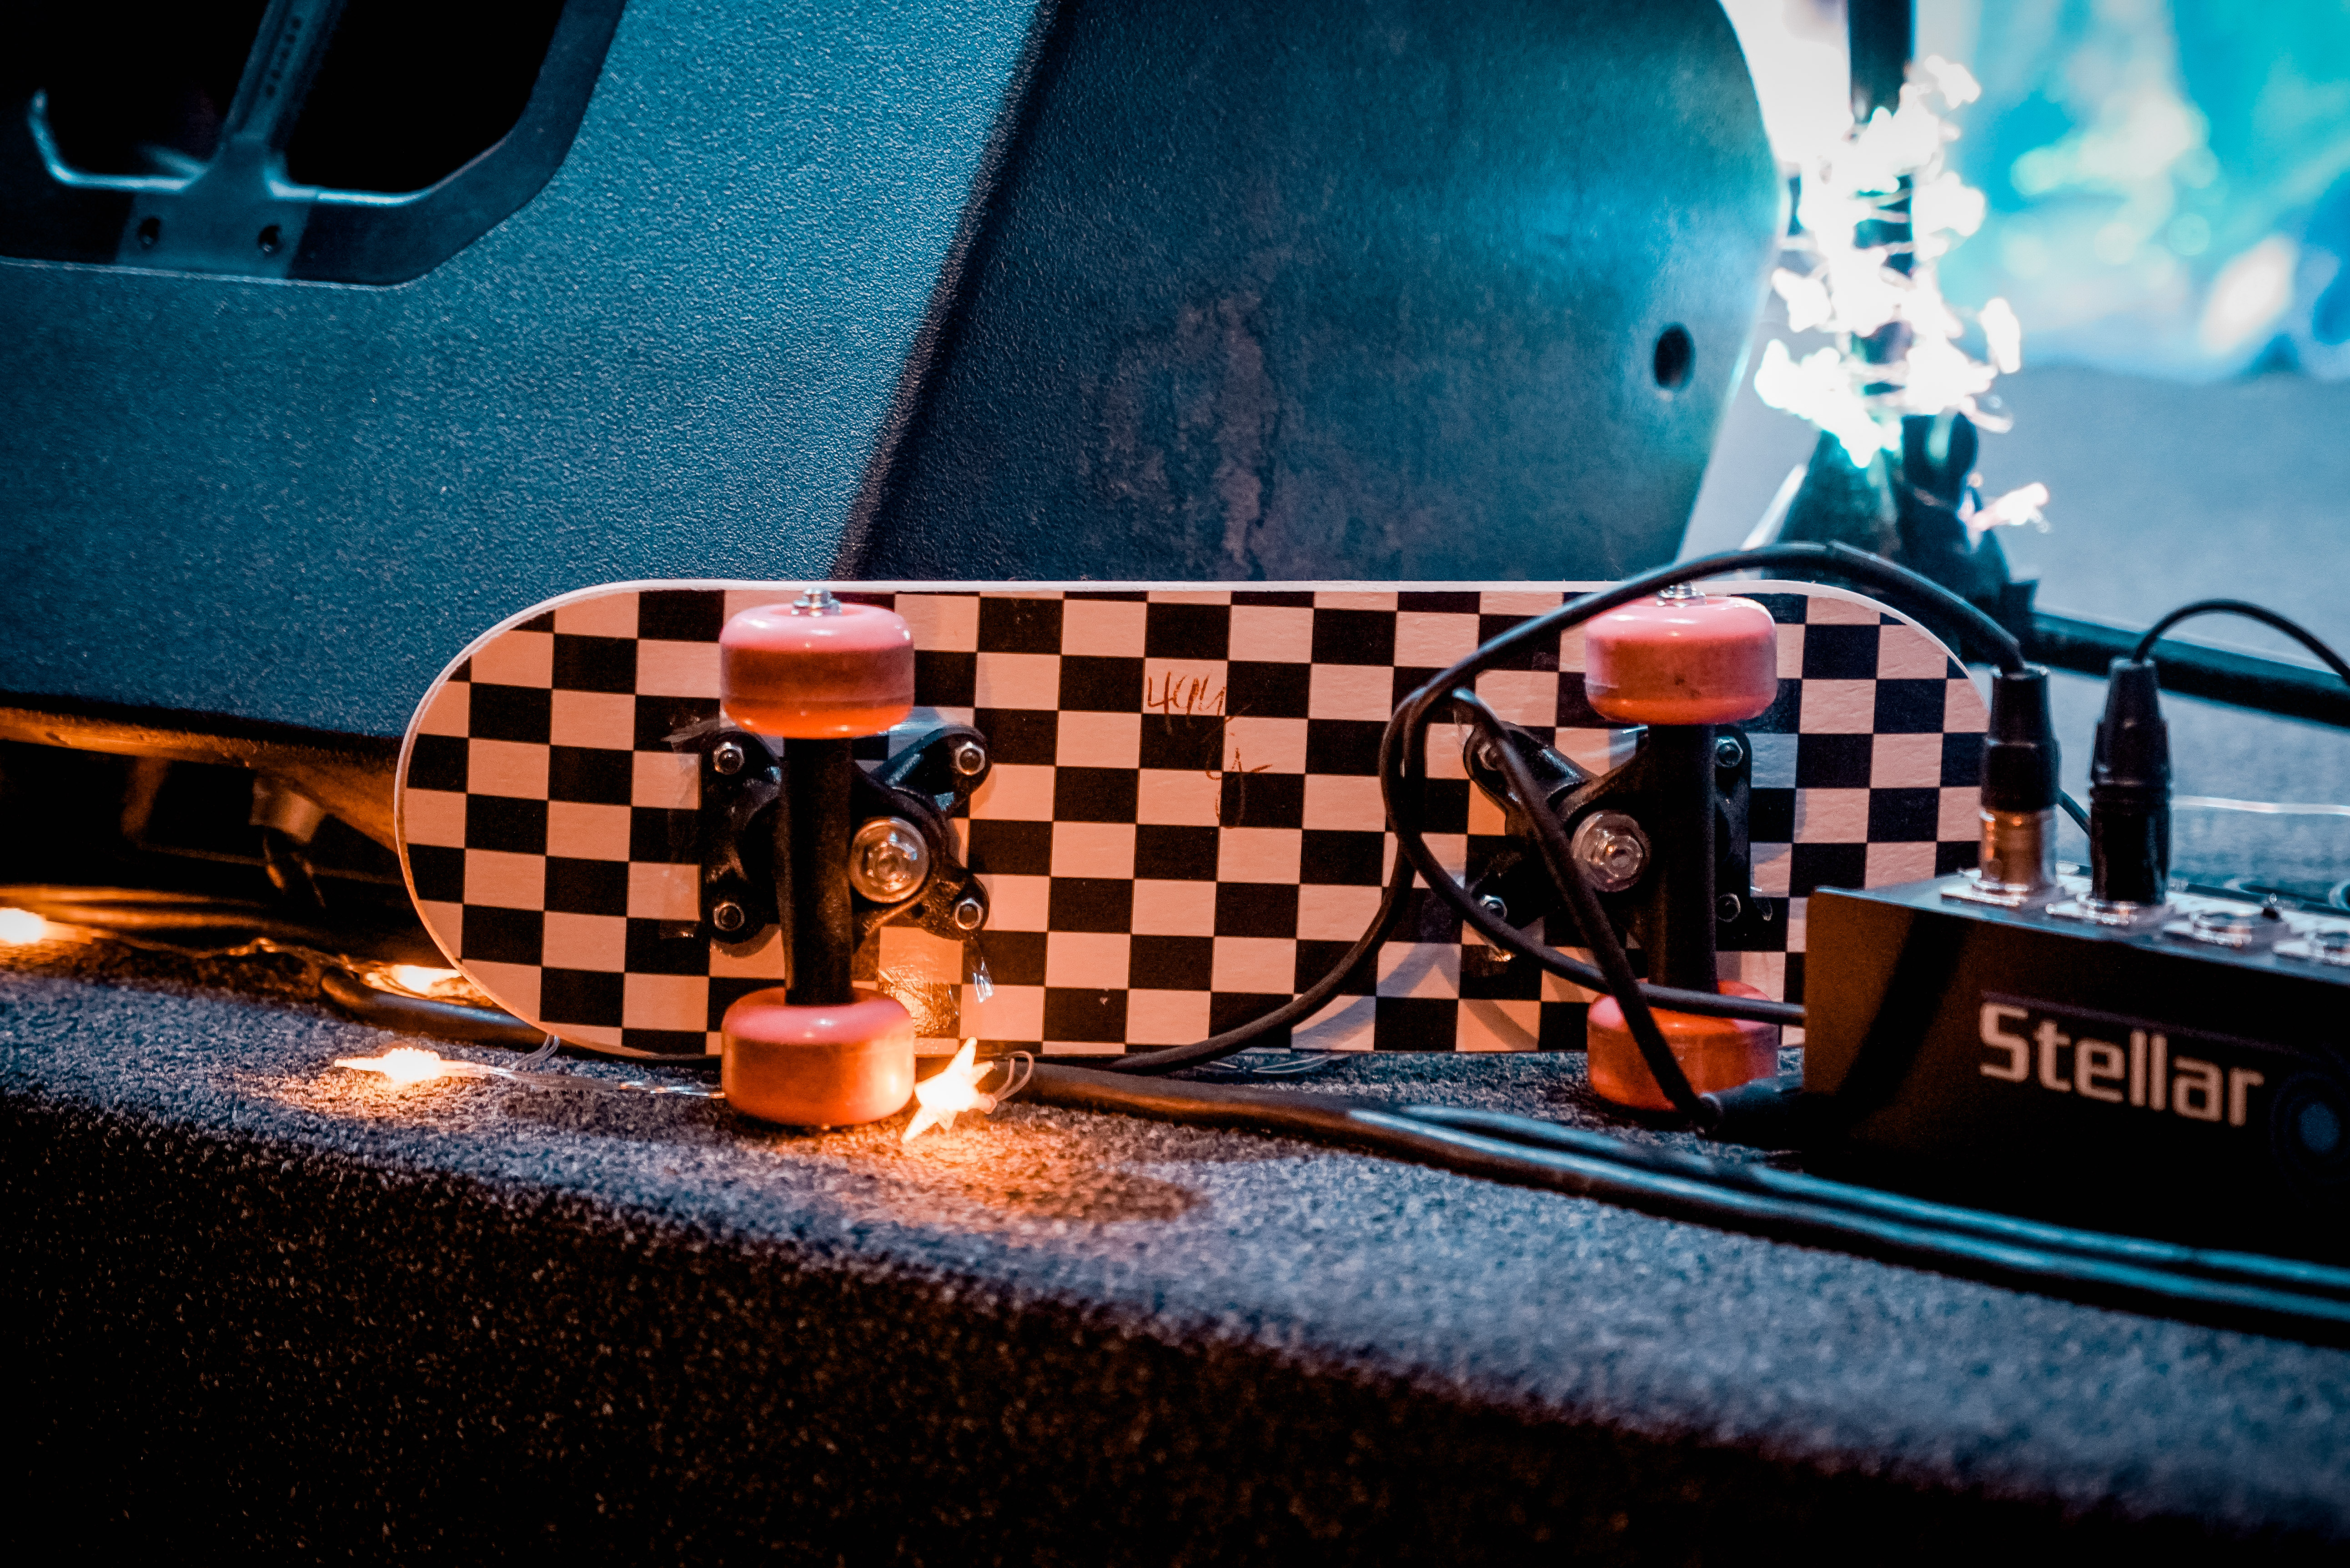 A penny board on stage